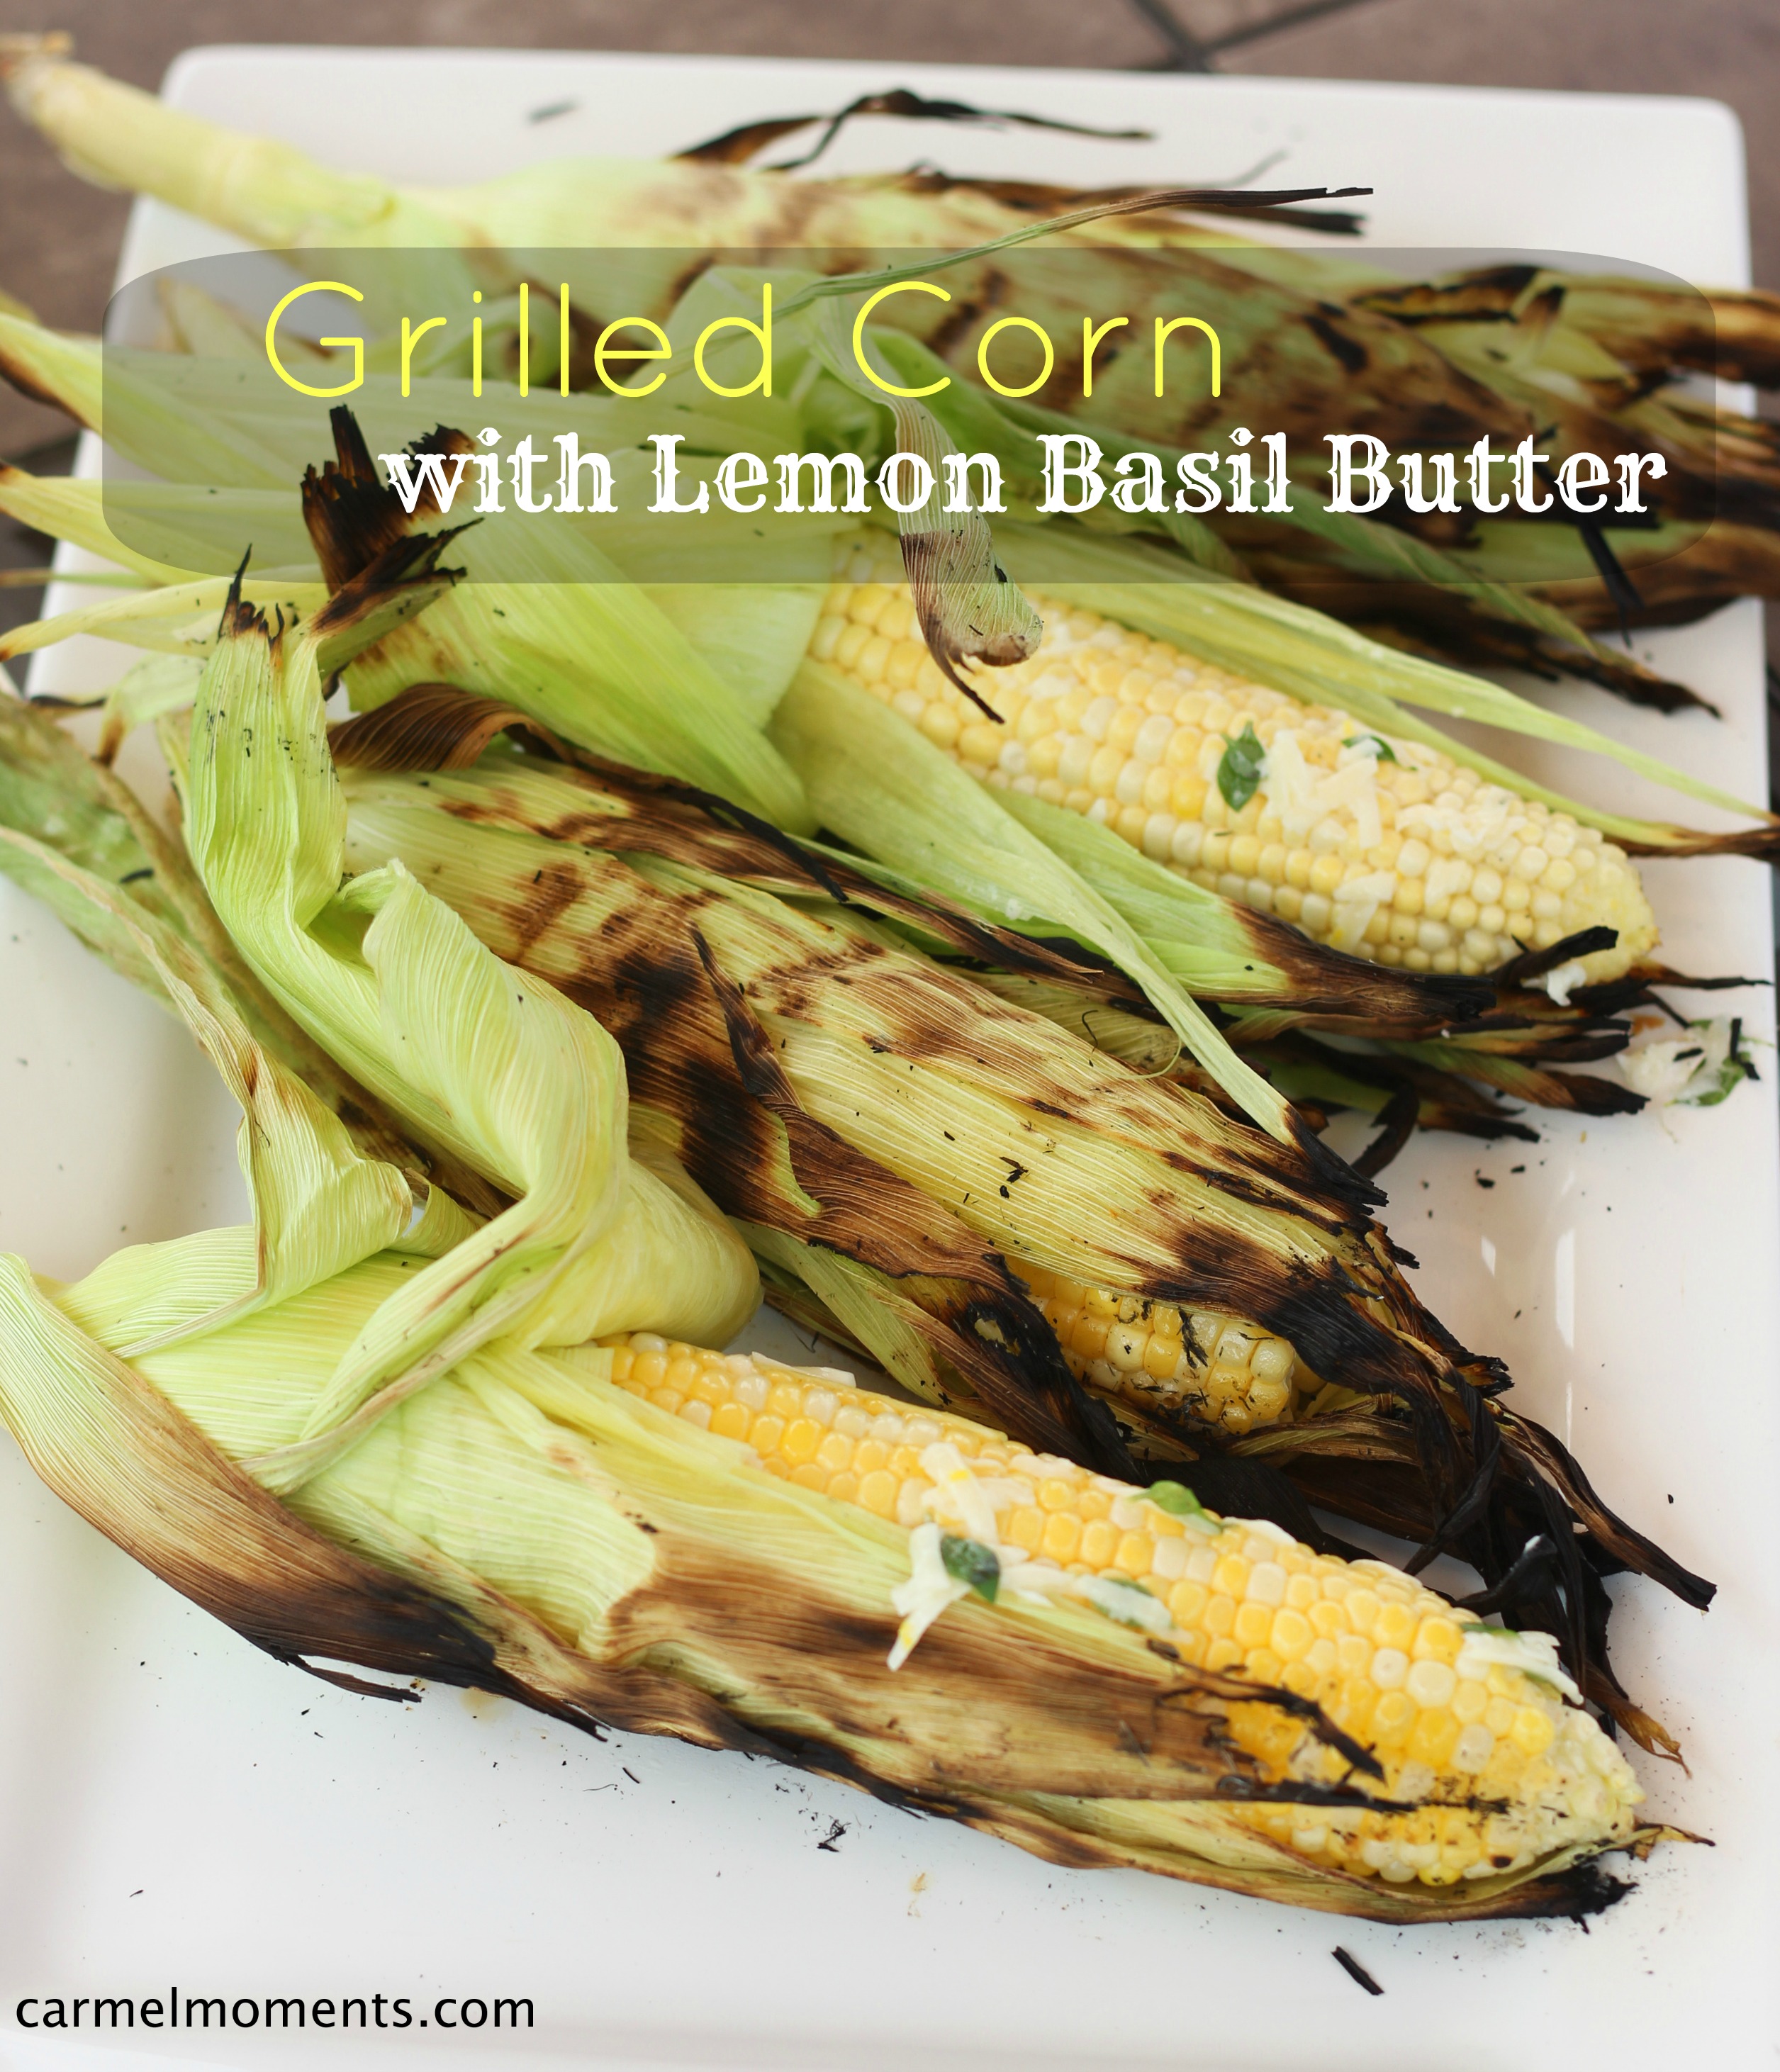 Grilled Corn with Lemon Basil Butter